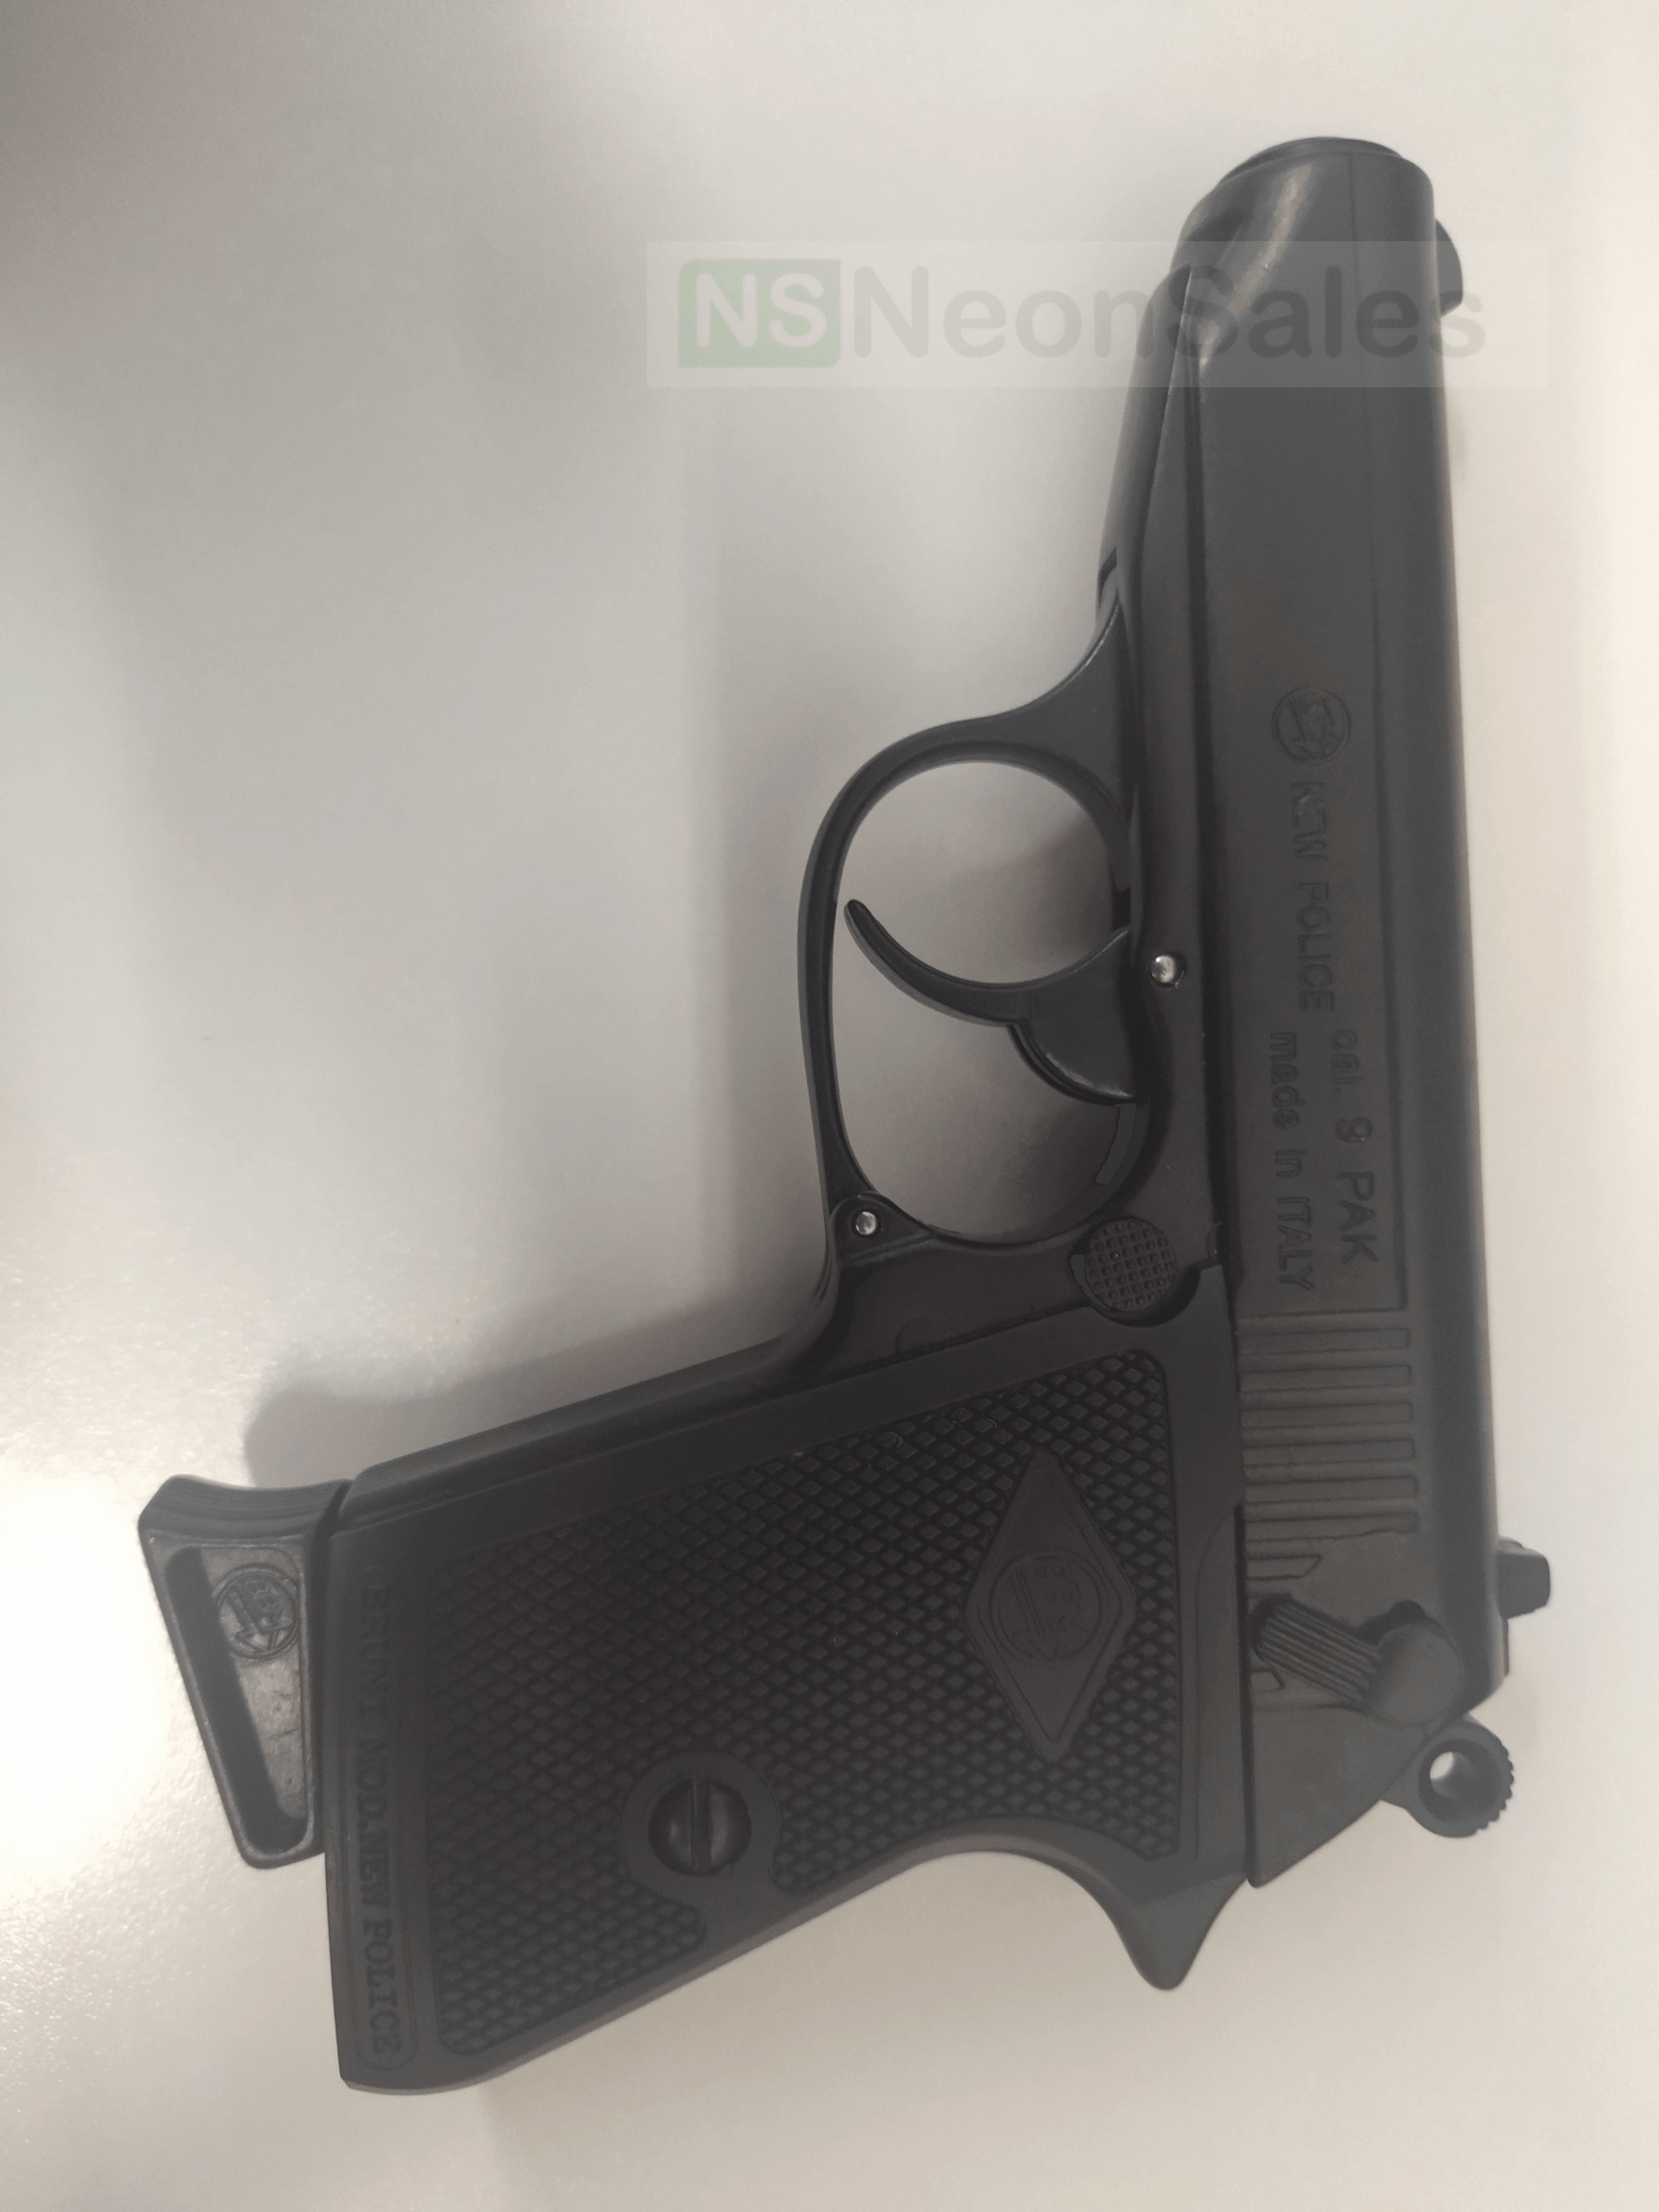 Pistola Replica Walther PPK (New Police) a Salve Cal.9mm Bruni